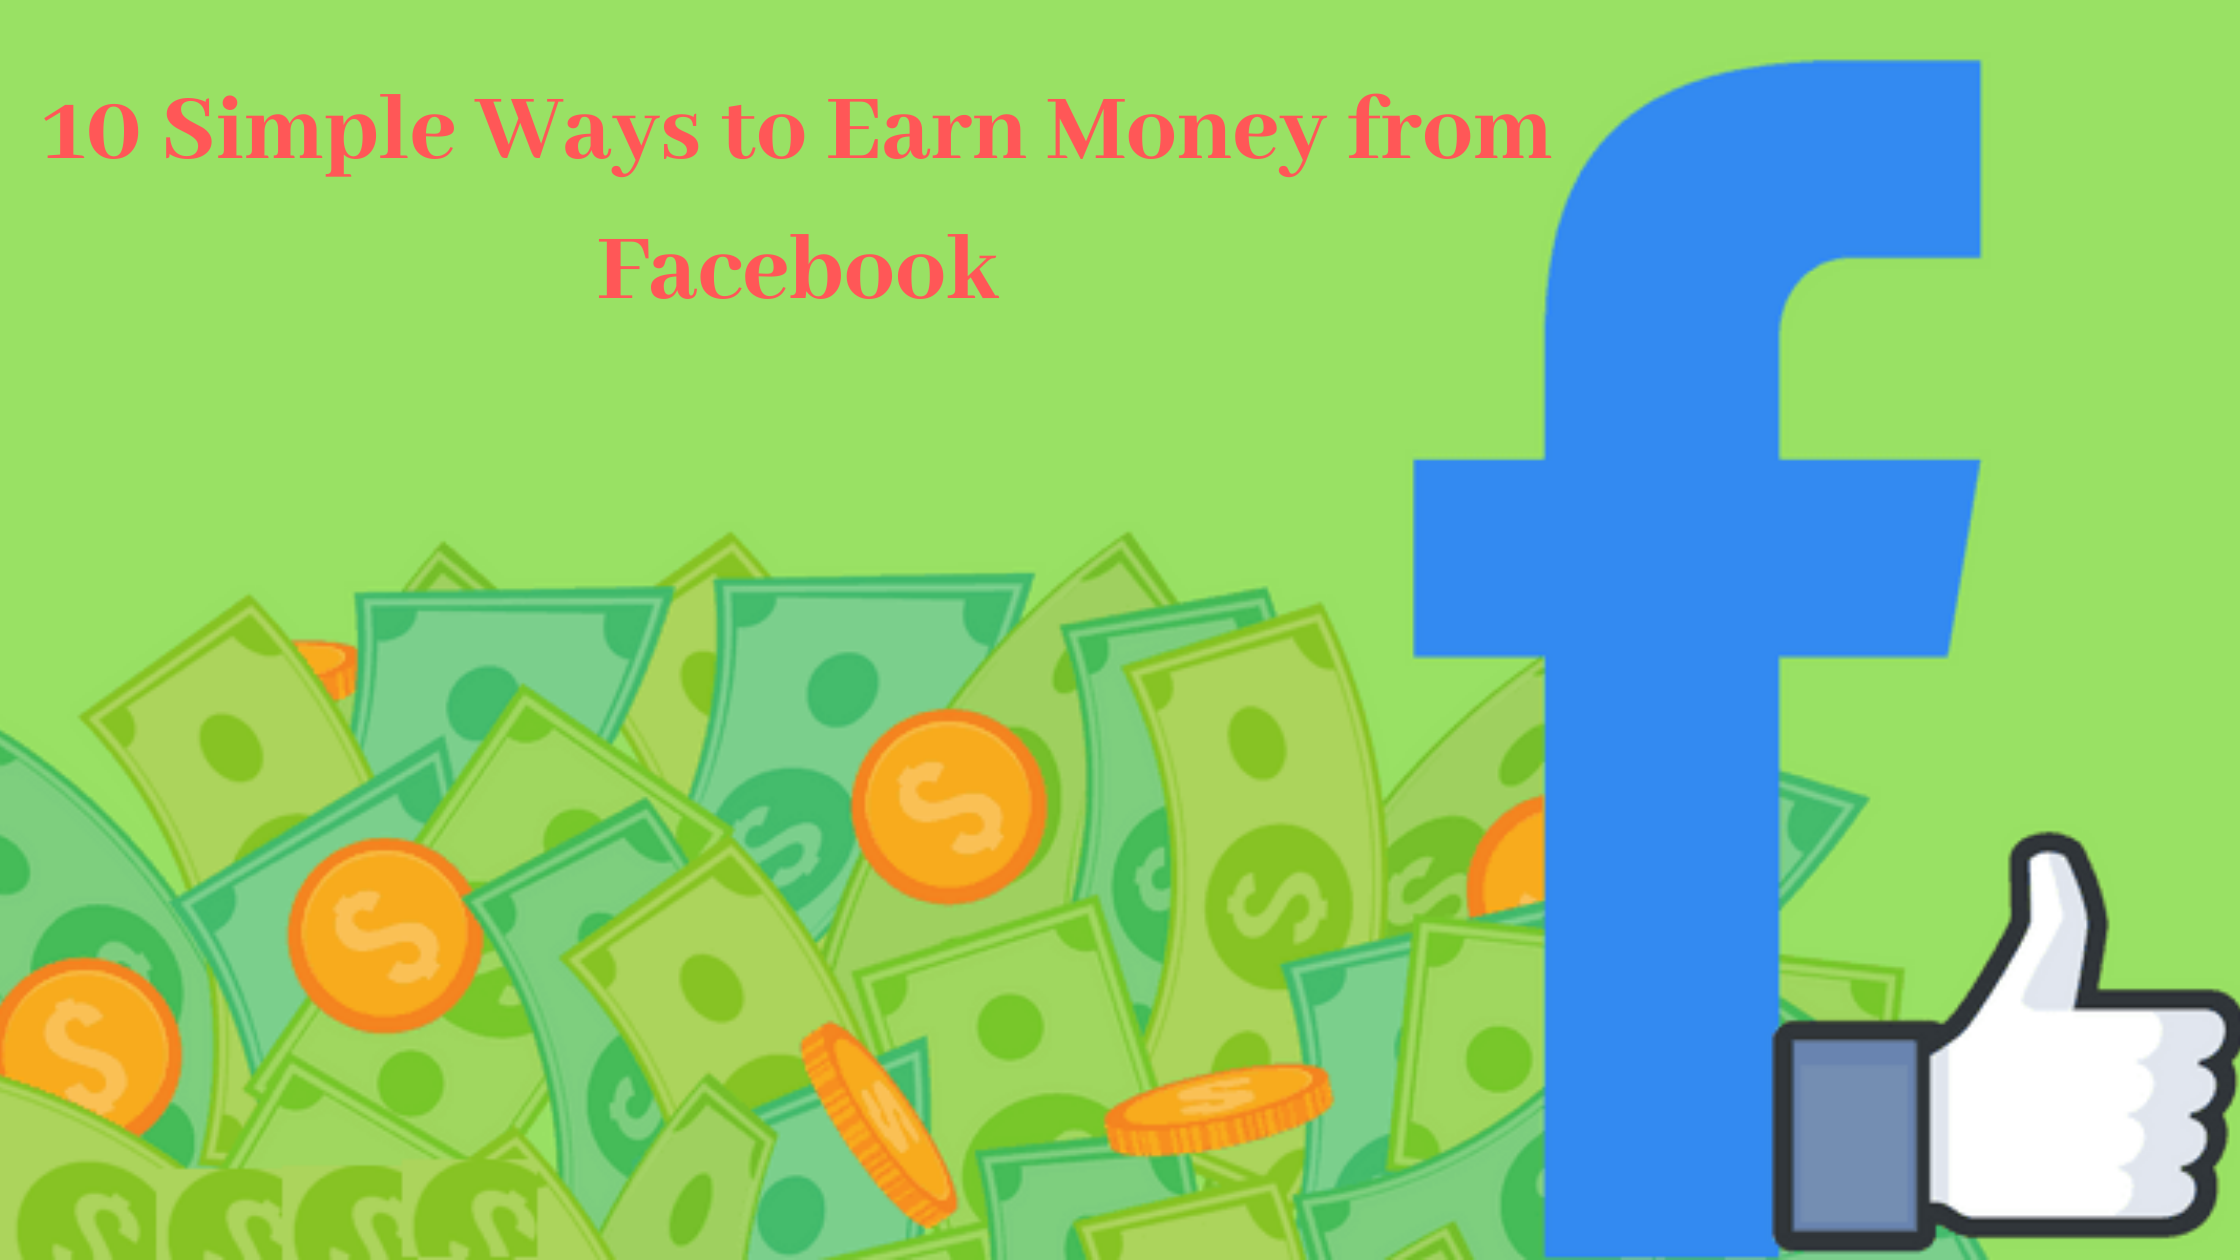 10 Simple Ways to Earn Money from Facebook